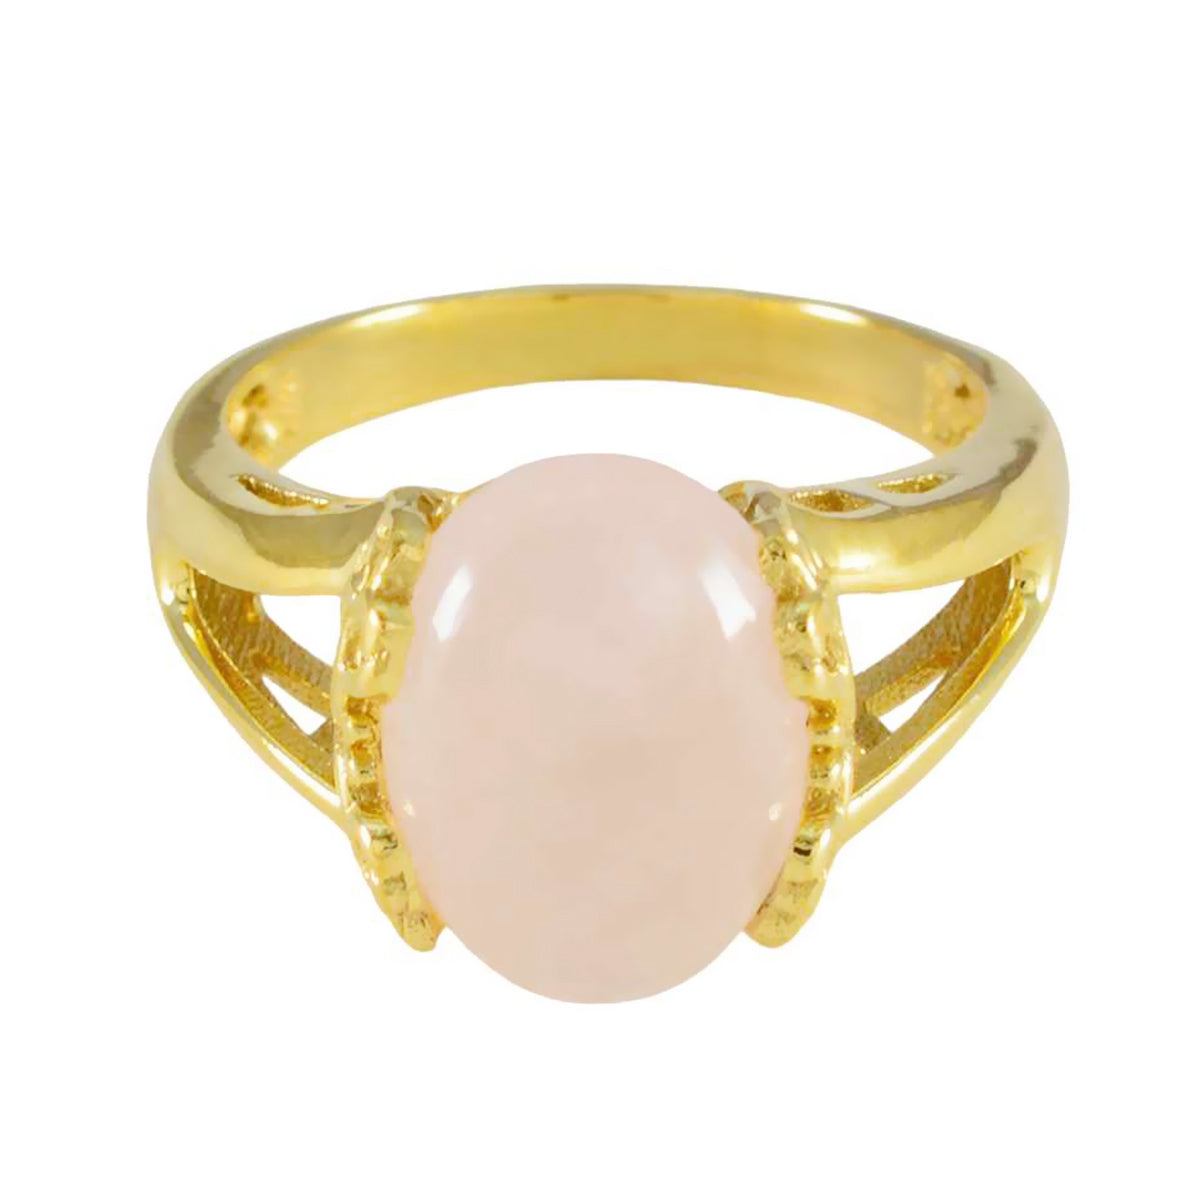 Riyo Suppiler Silver Ring With Yellow Gold Plating Rose Quartz Stone Oval Shape Prong Setting Stylish Jewelry Easter Ring